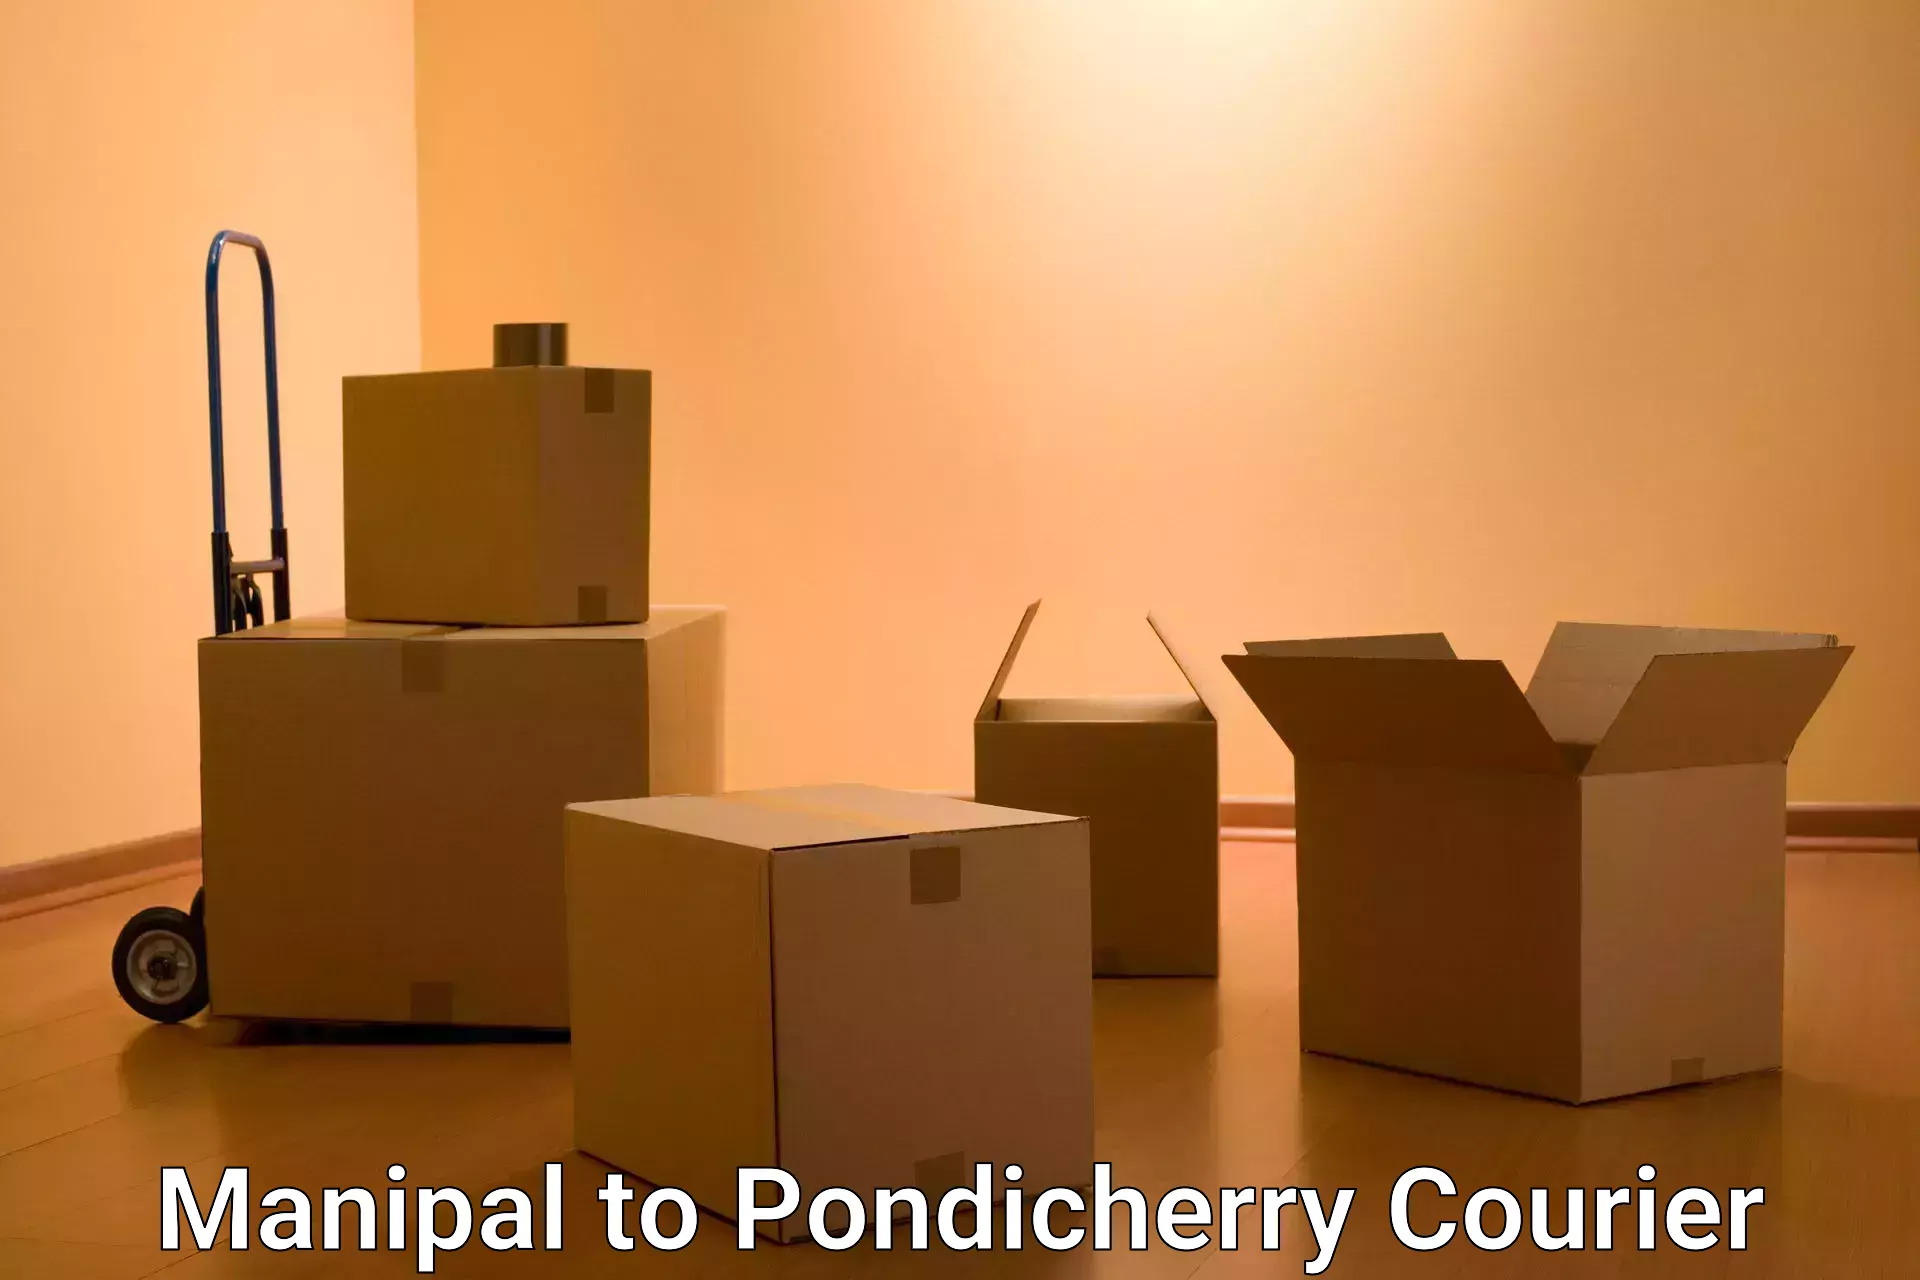 Global shipping networks in Manipal to Pondicherry